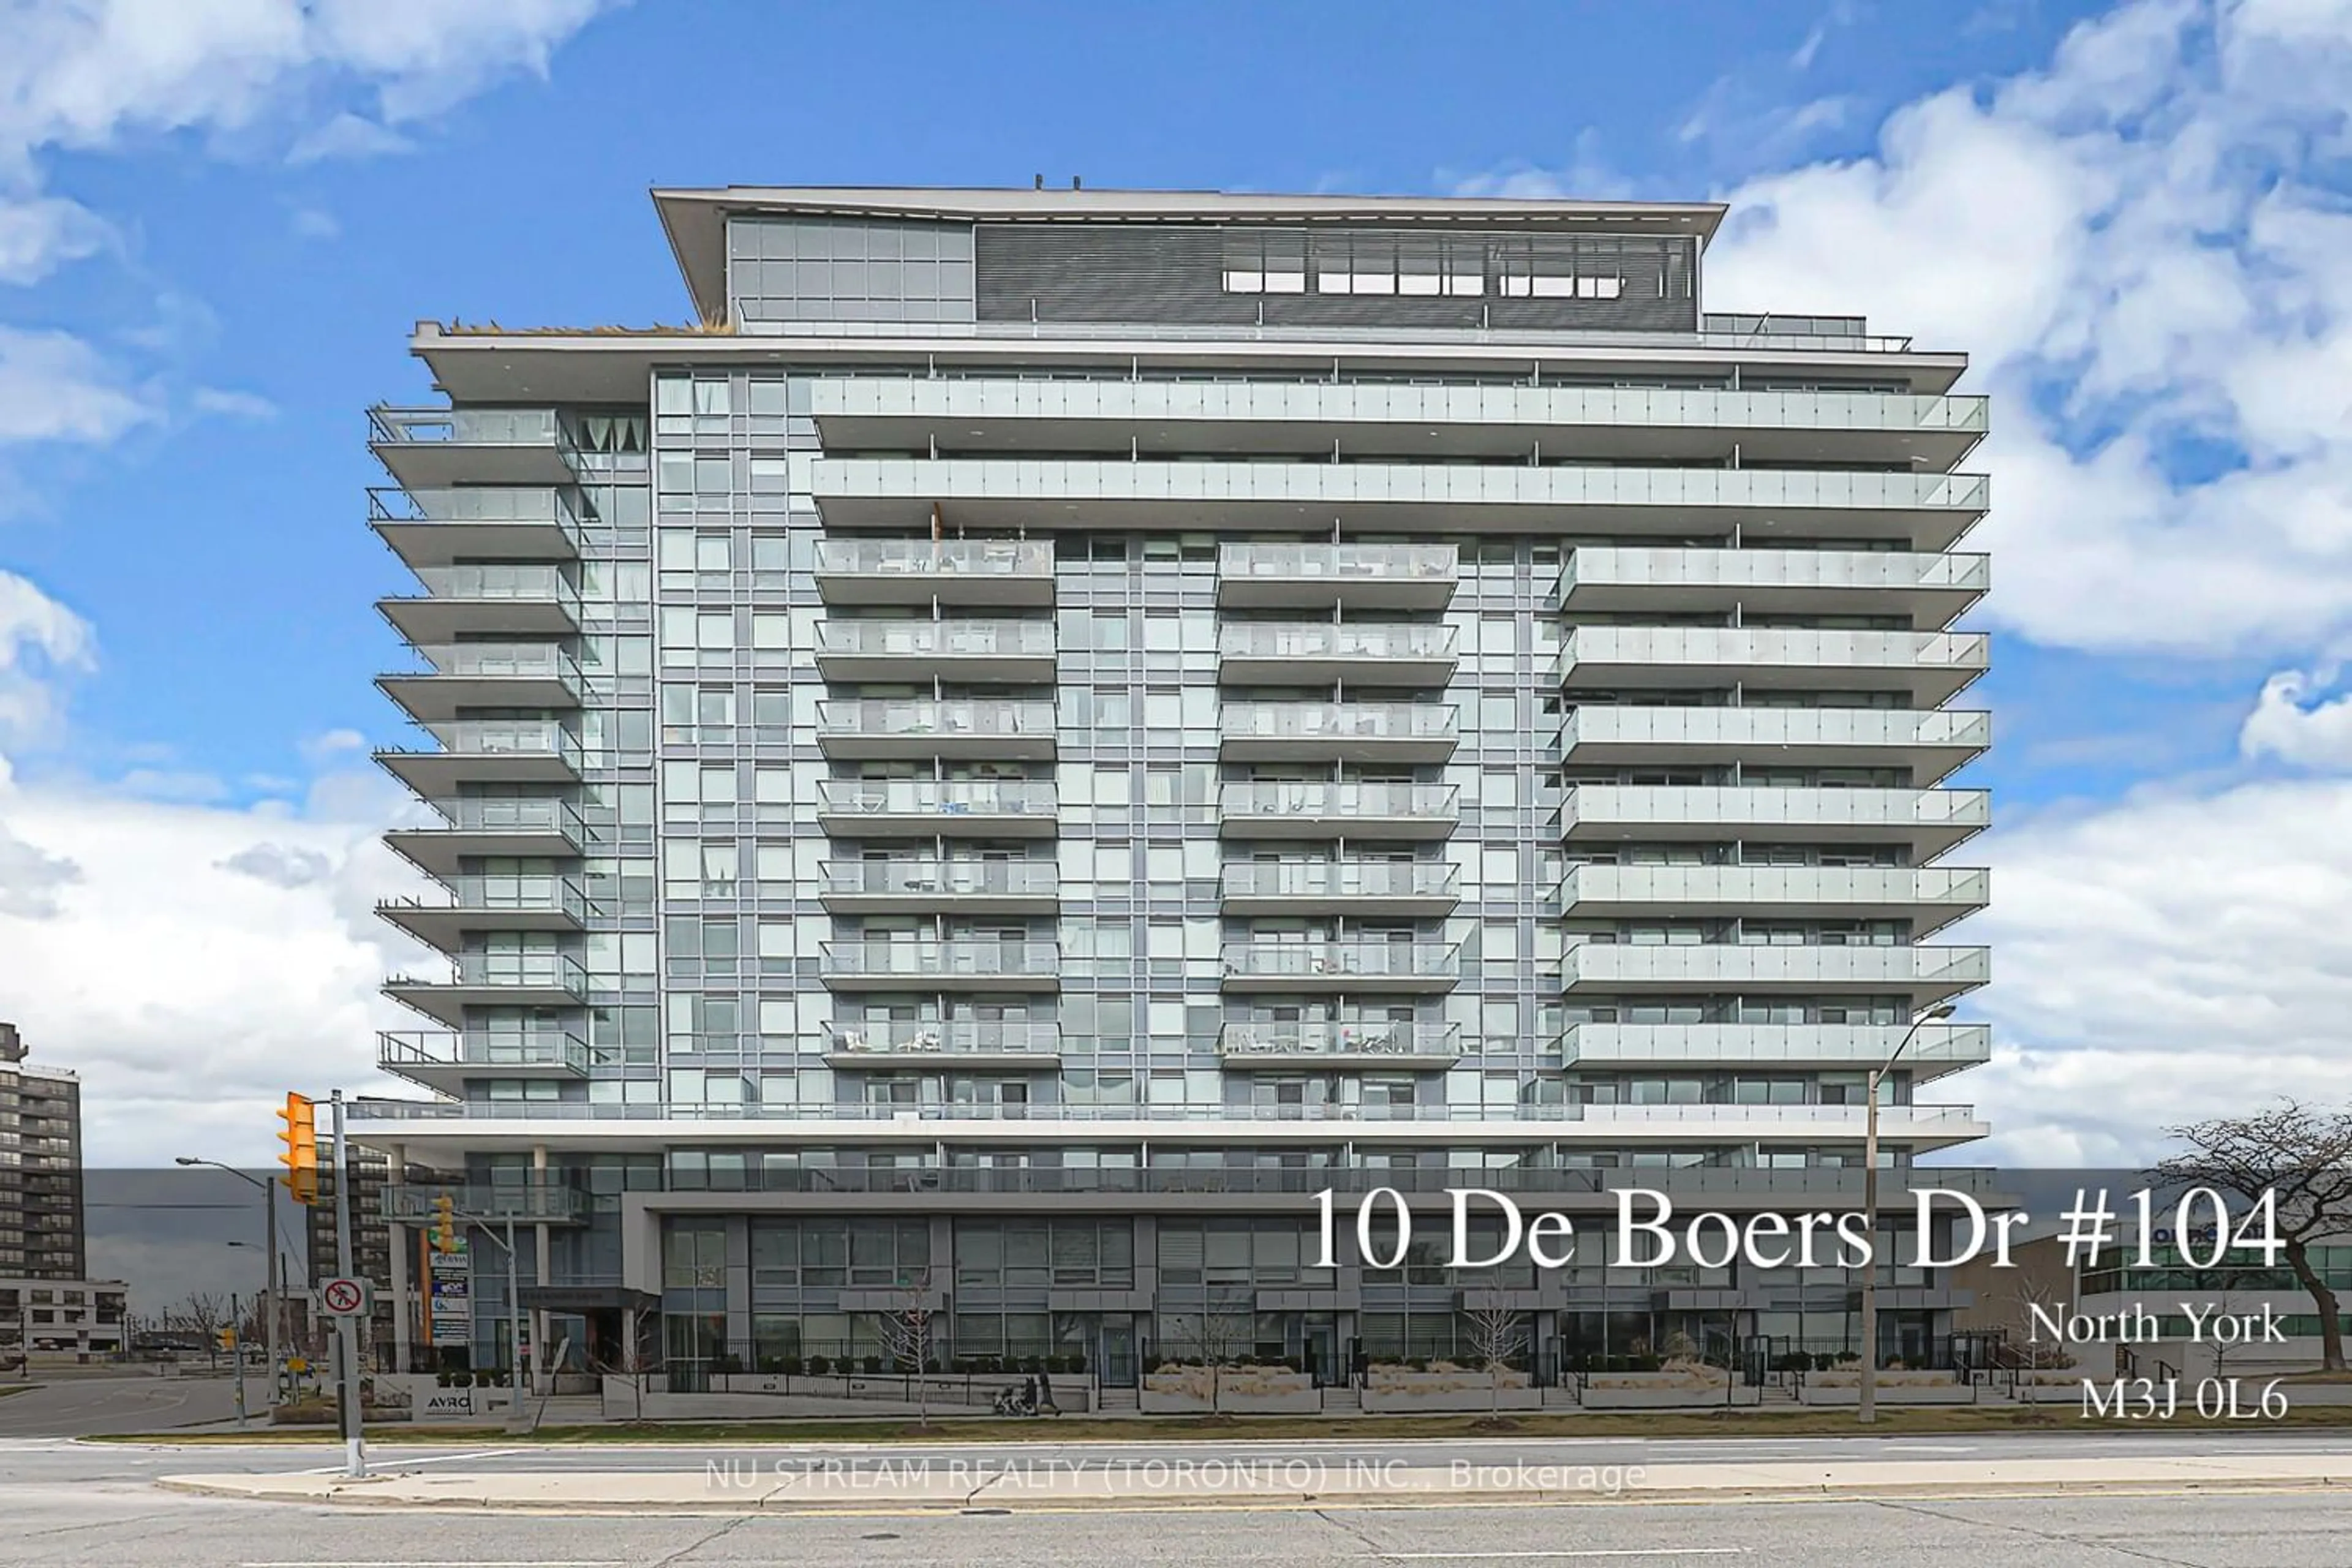 A pic from exterior of the house or condo for 10 De Boers Dr #Th04, Toronto Ontario M3J 0L6